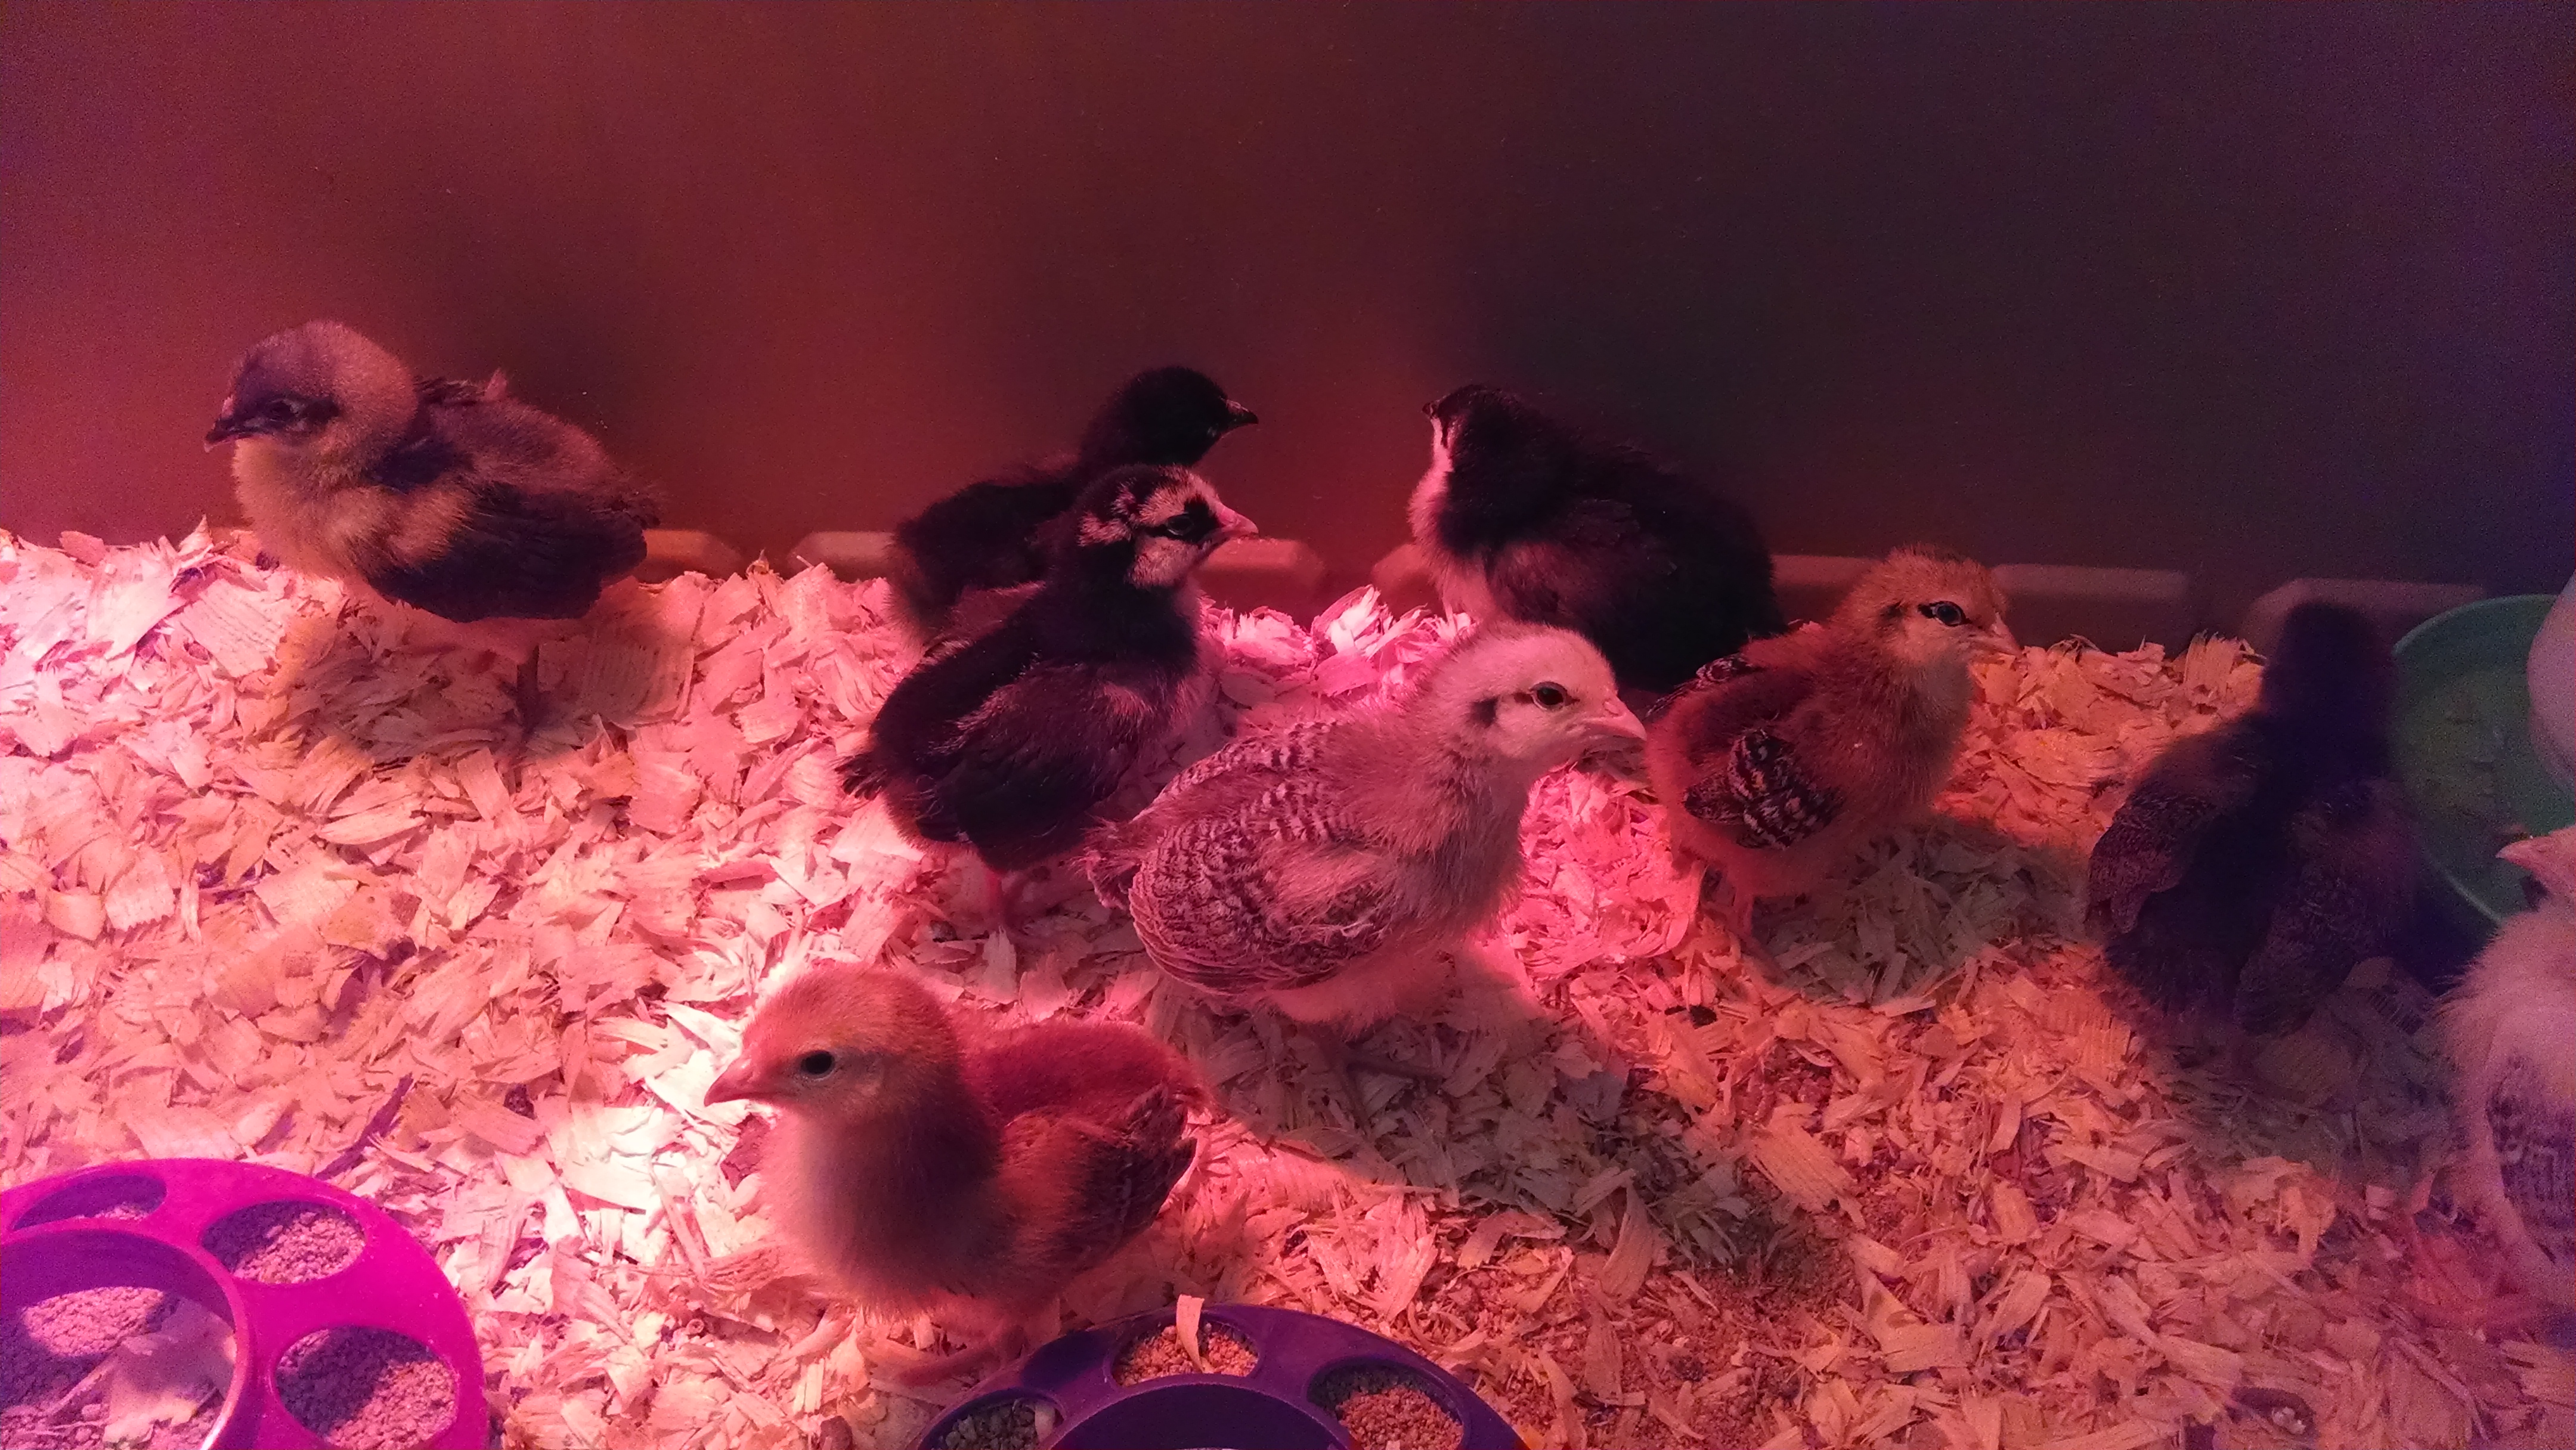 Our new baby chicks in the brooder.